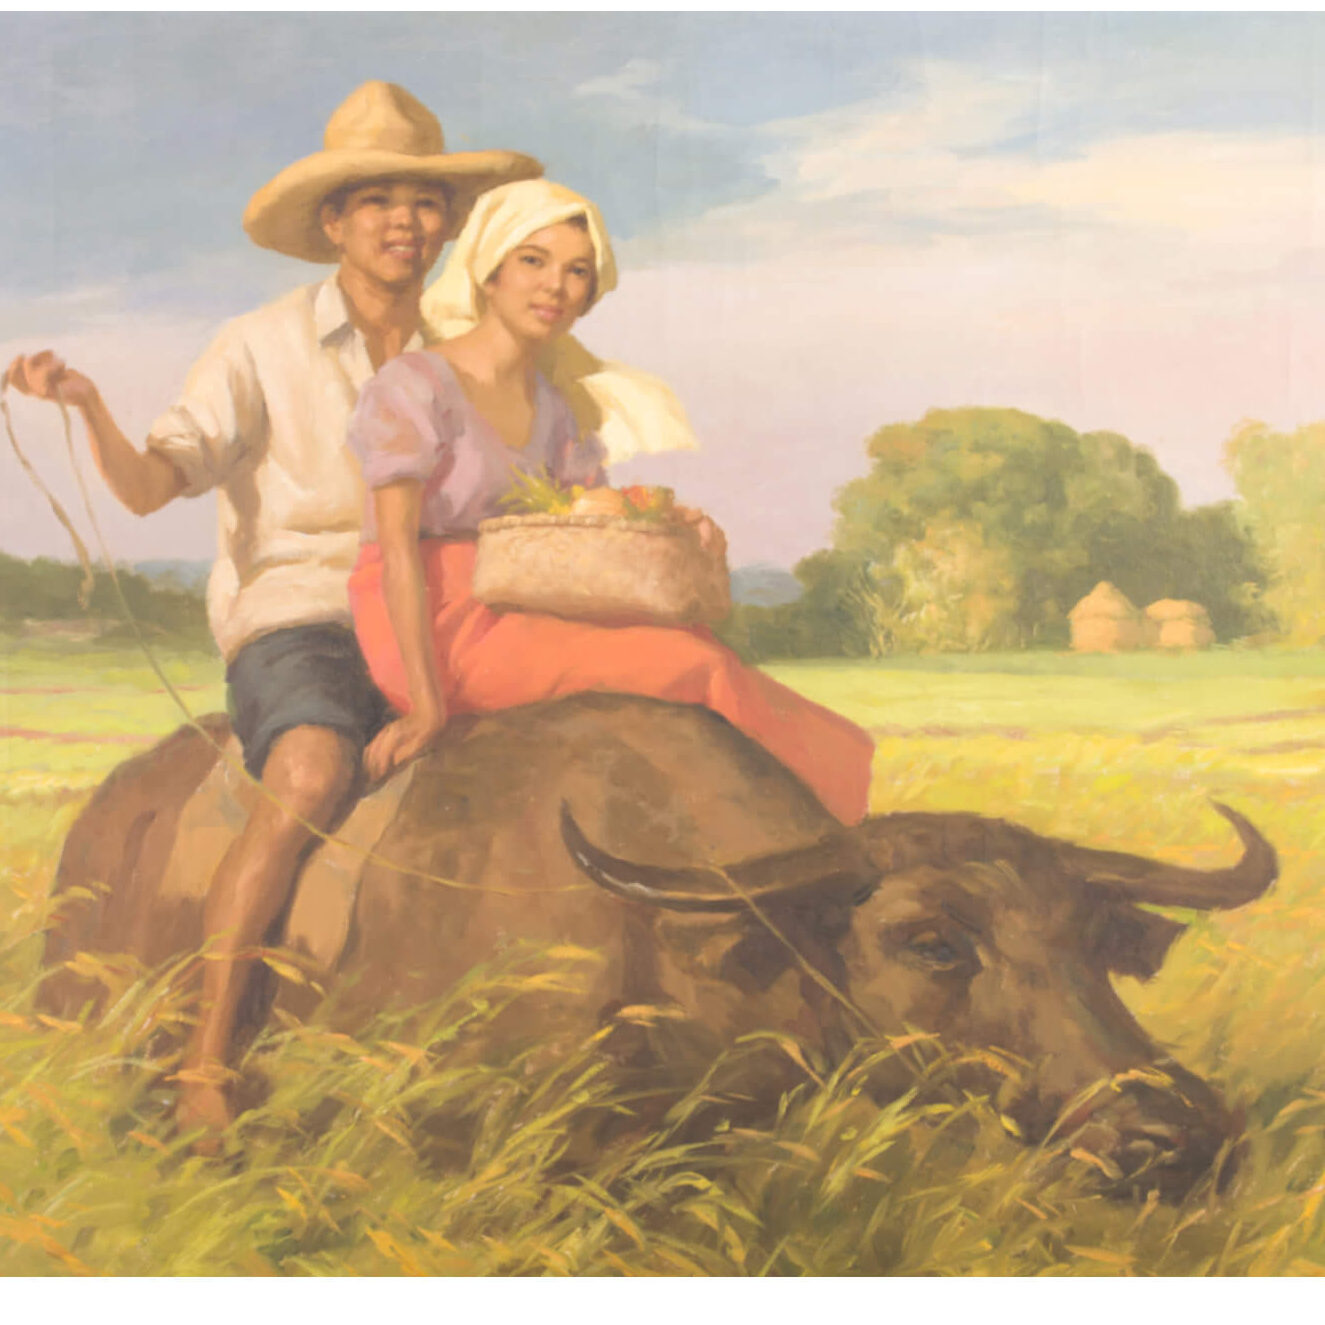 "Man and Woman on Carabao" by Fernando Amorsolo (giclee, edition of 50)